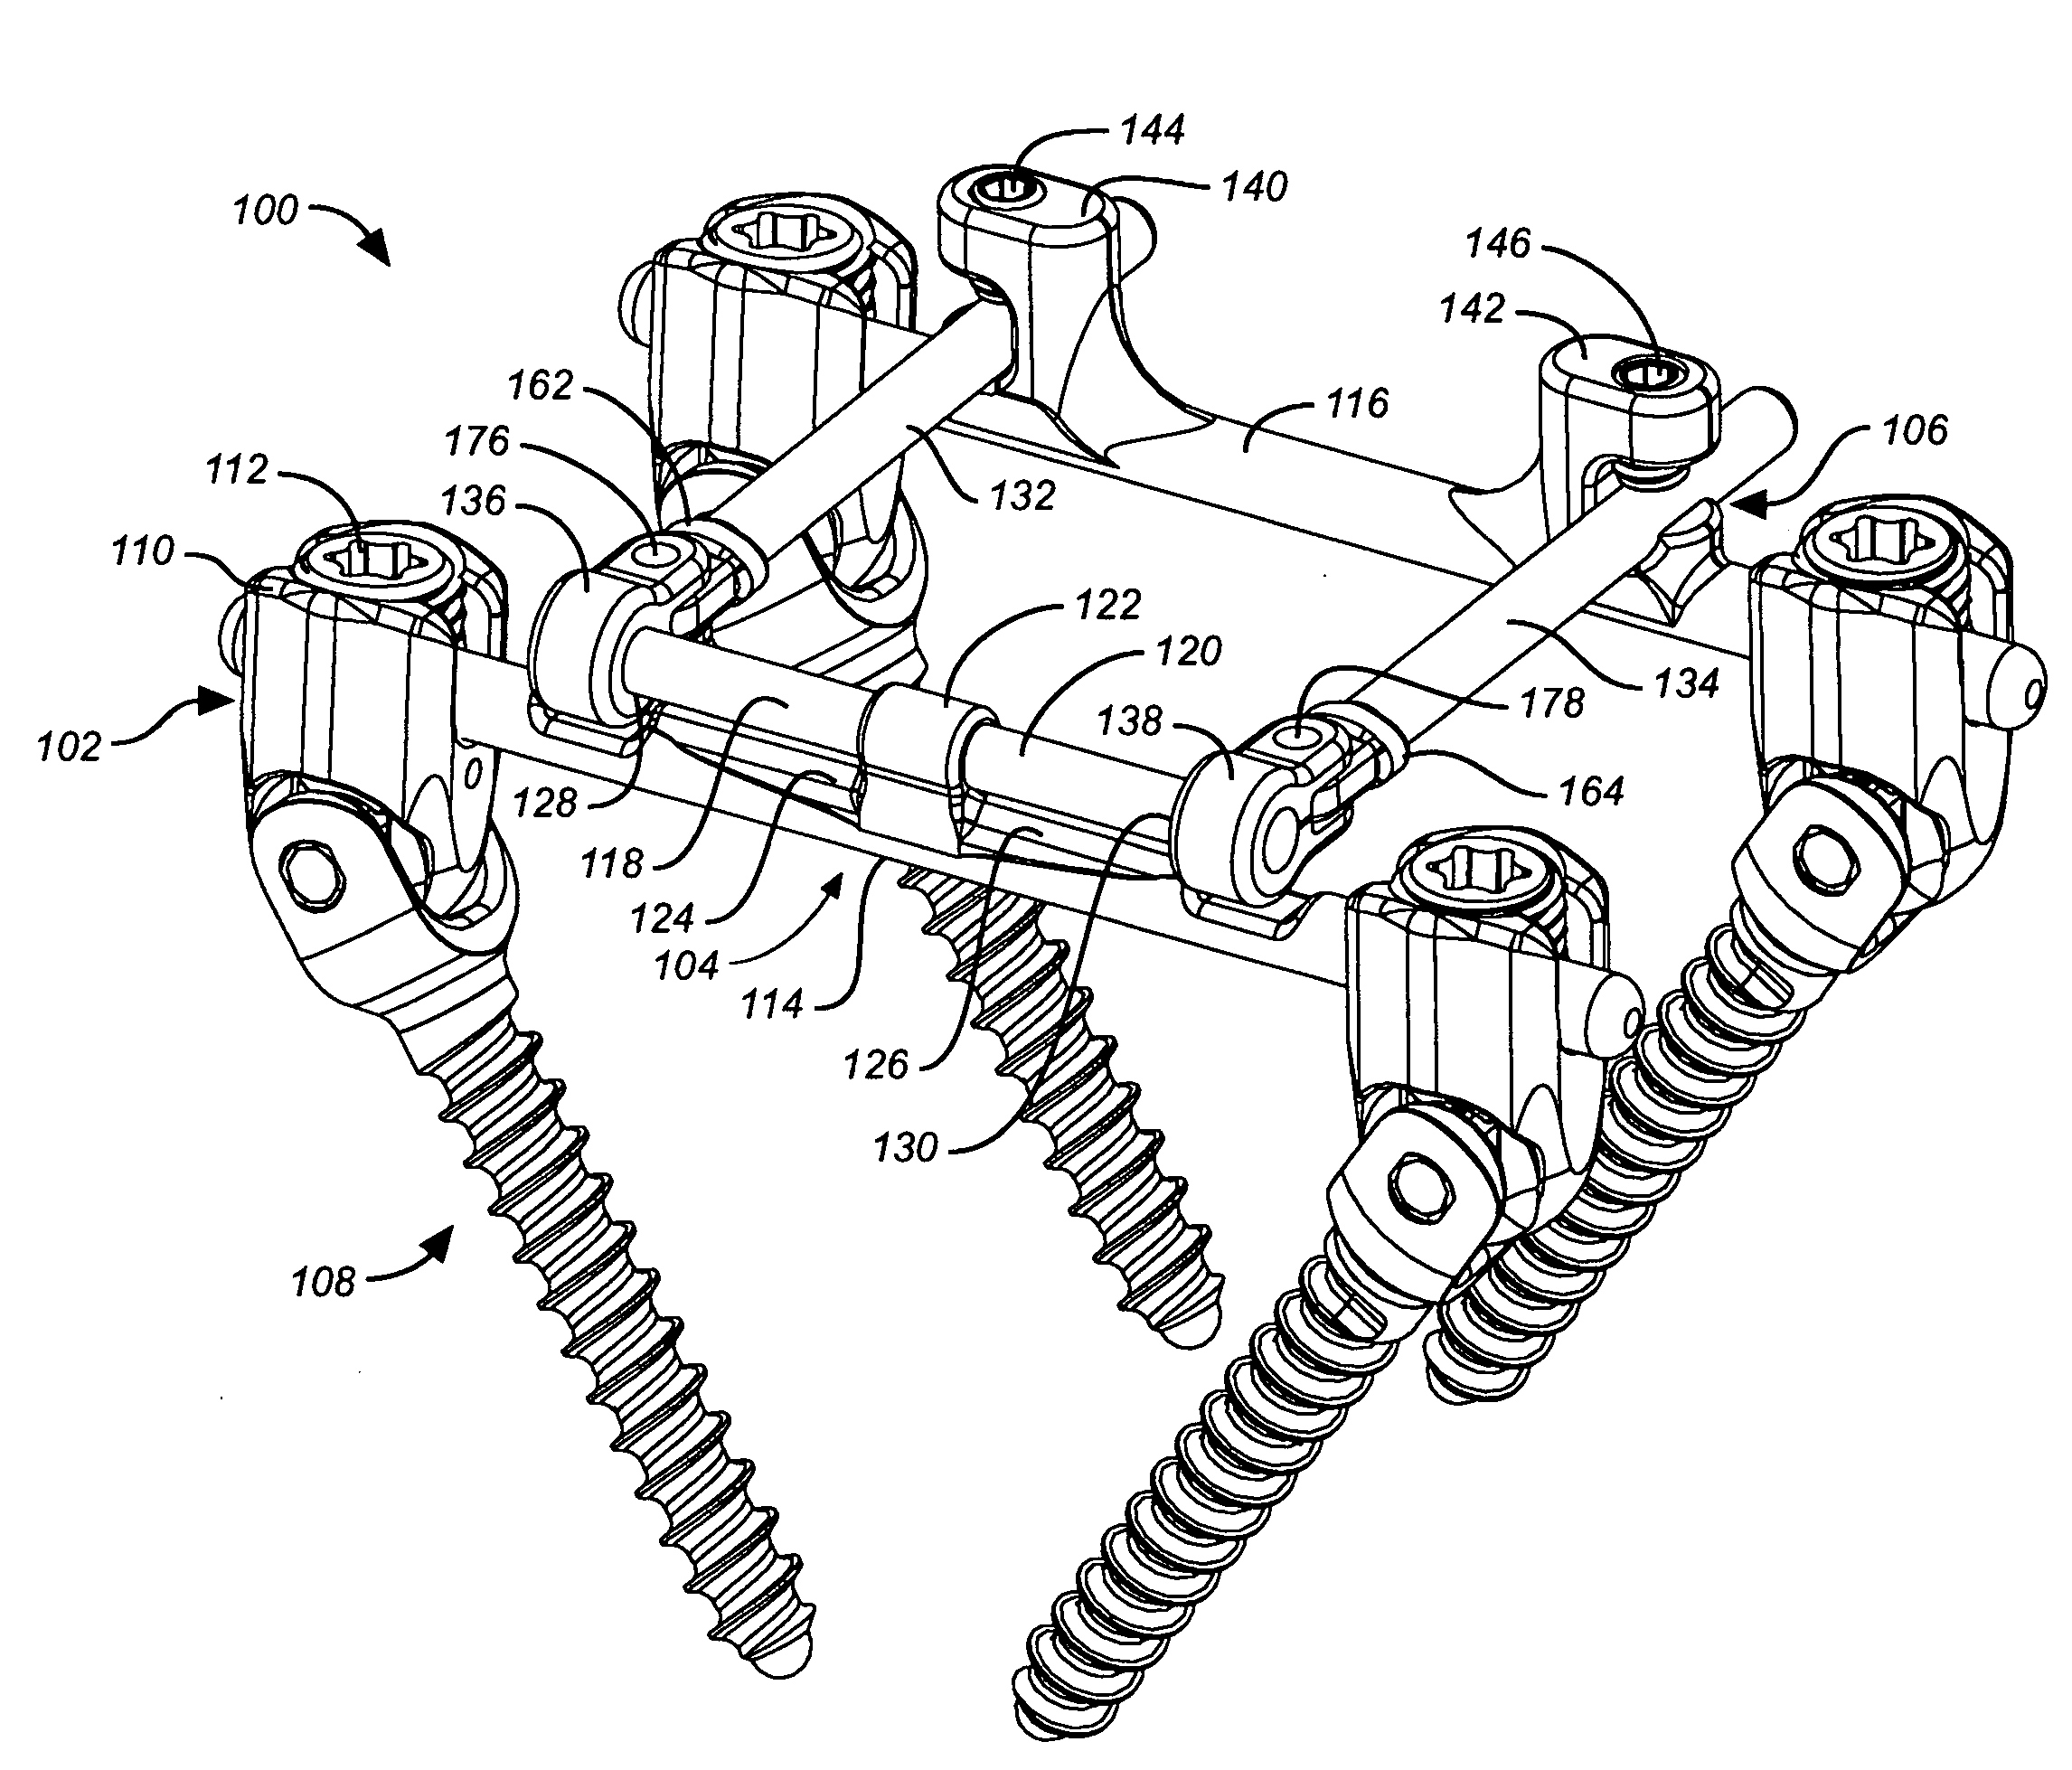 Dynamic stabilization and motion preservation spinal implantation system with a shielded deflection rod system and method